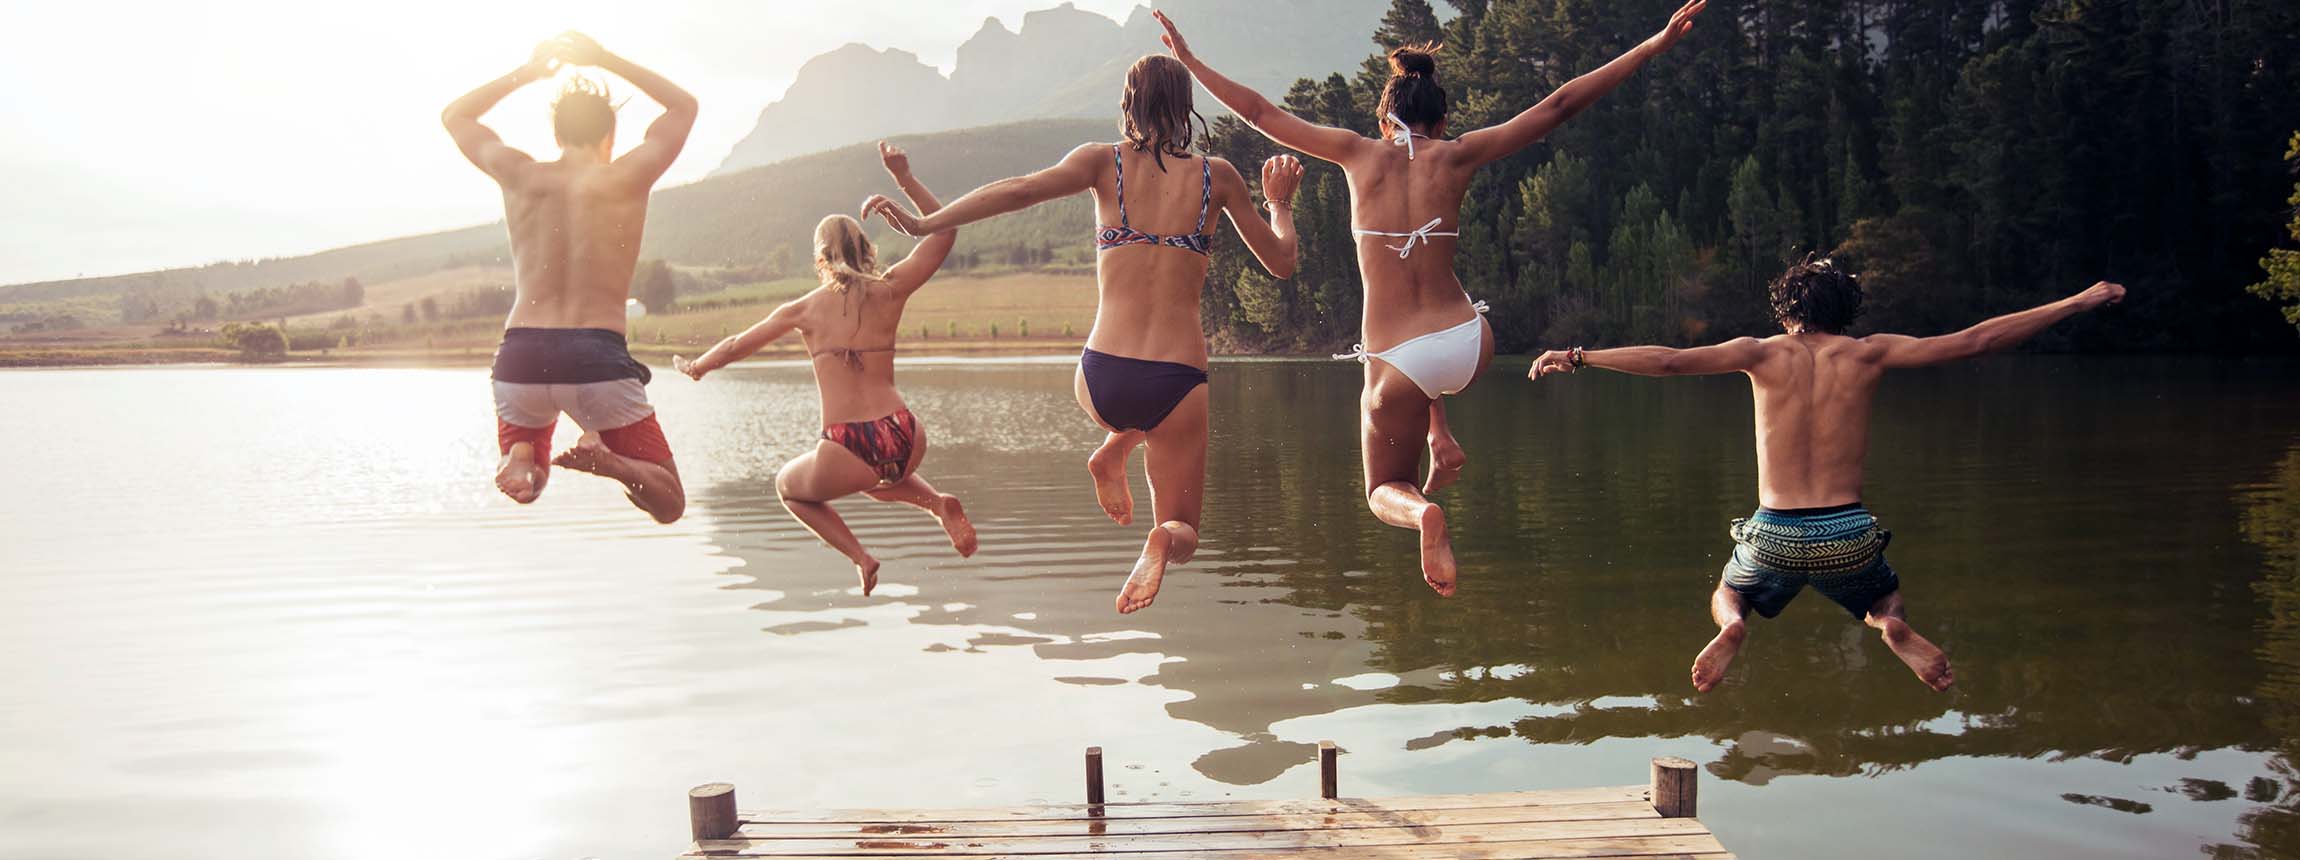 Young friends jumping into lake from a jetty